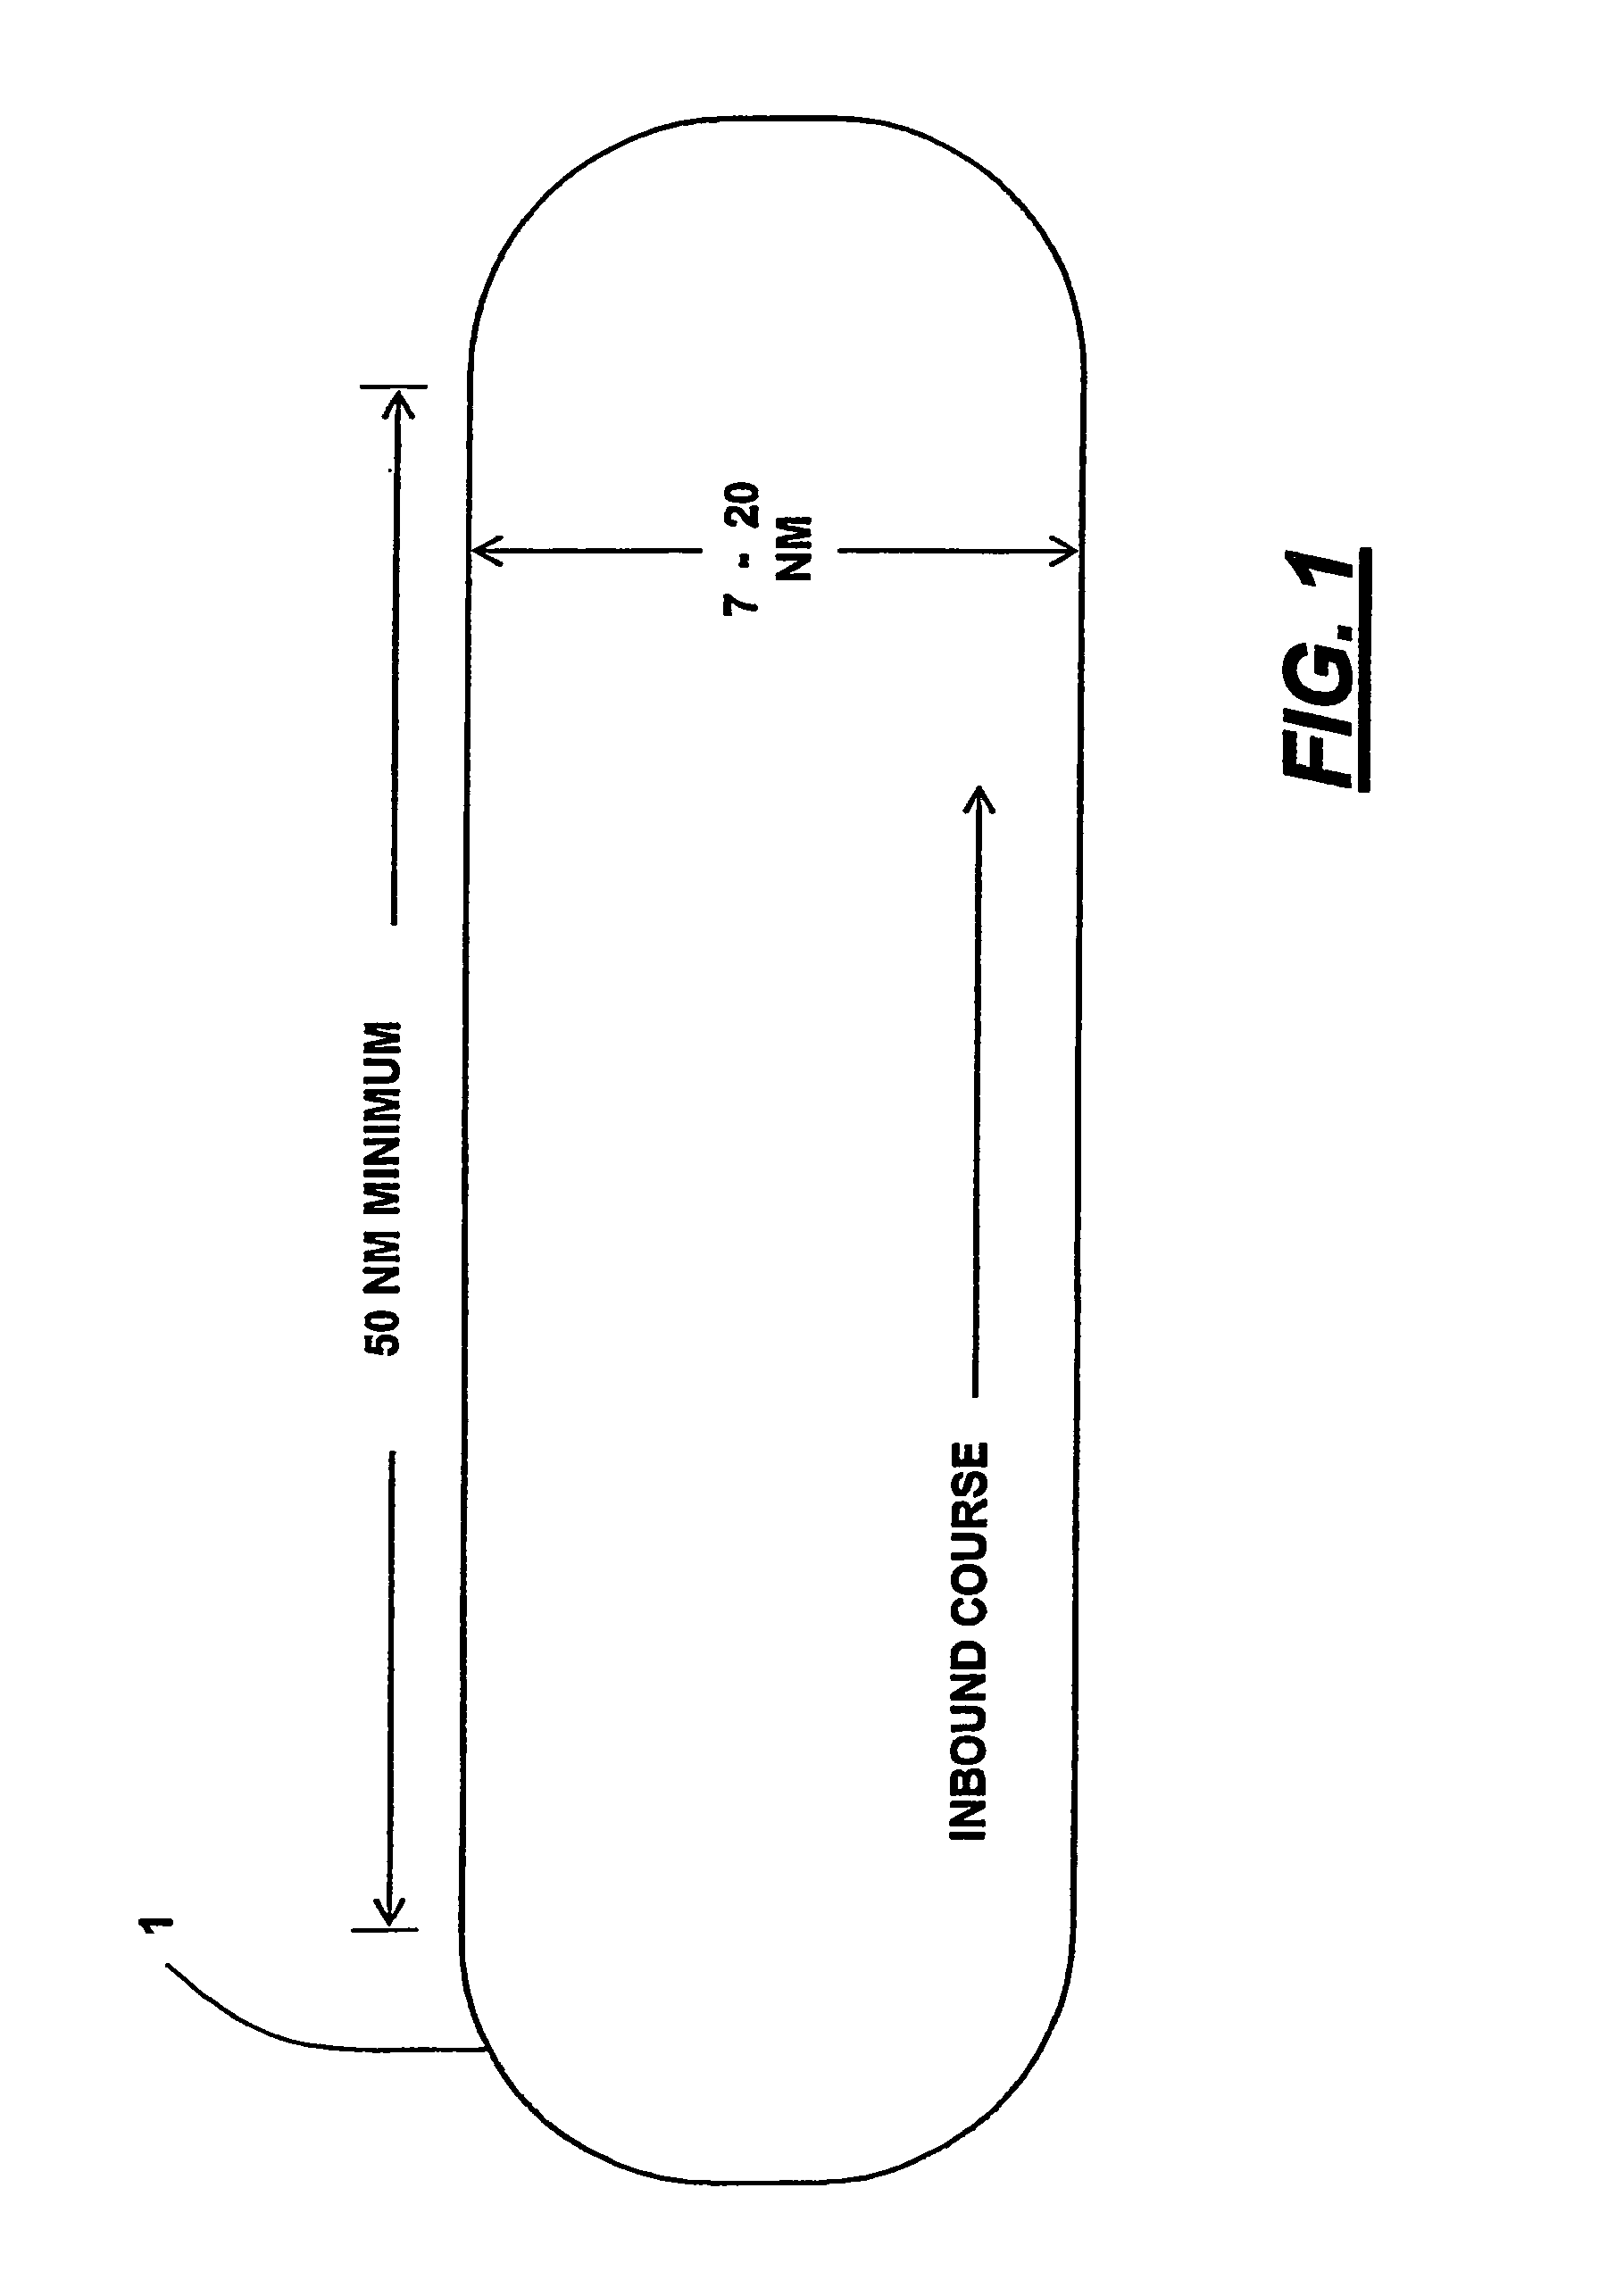 Geographically distributed simulation system, components and methods